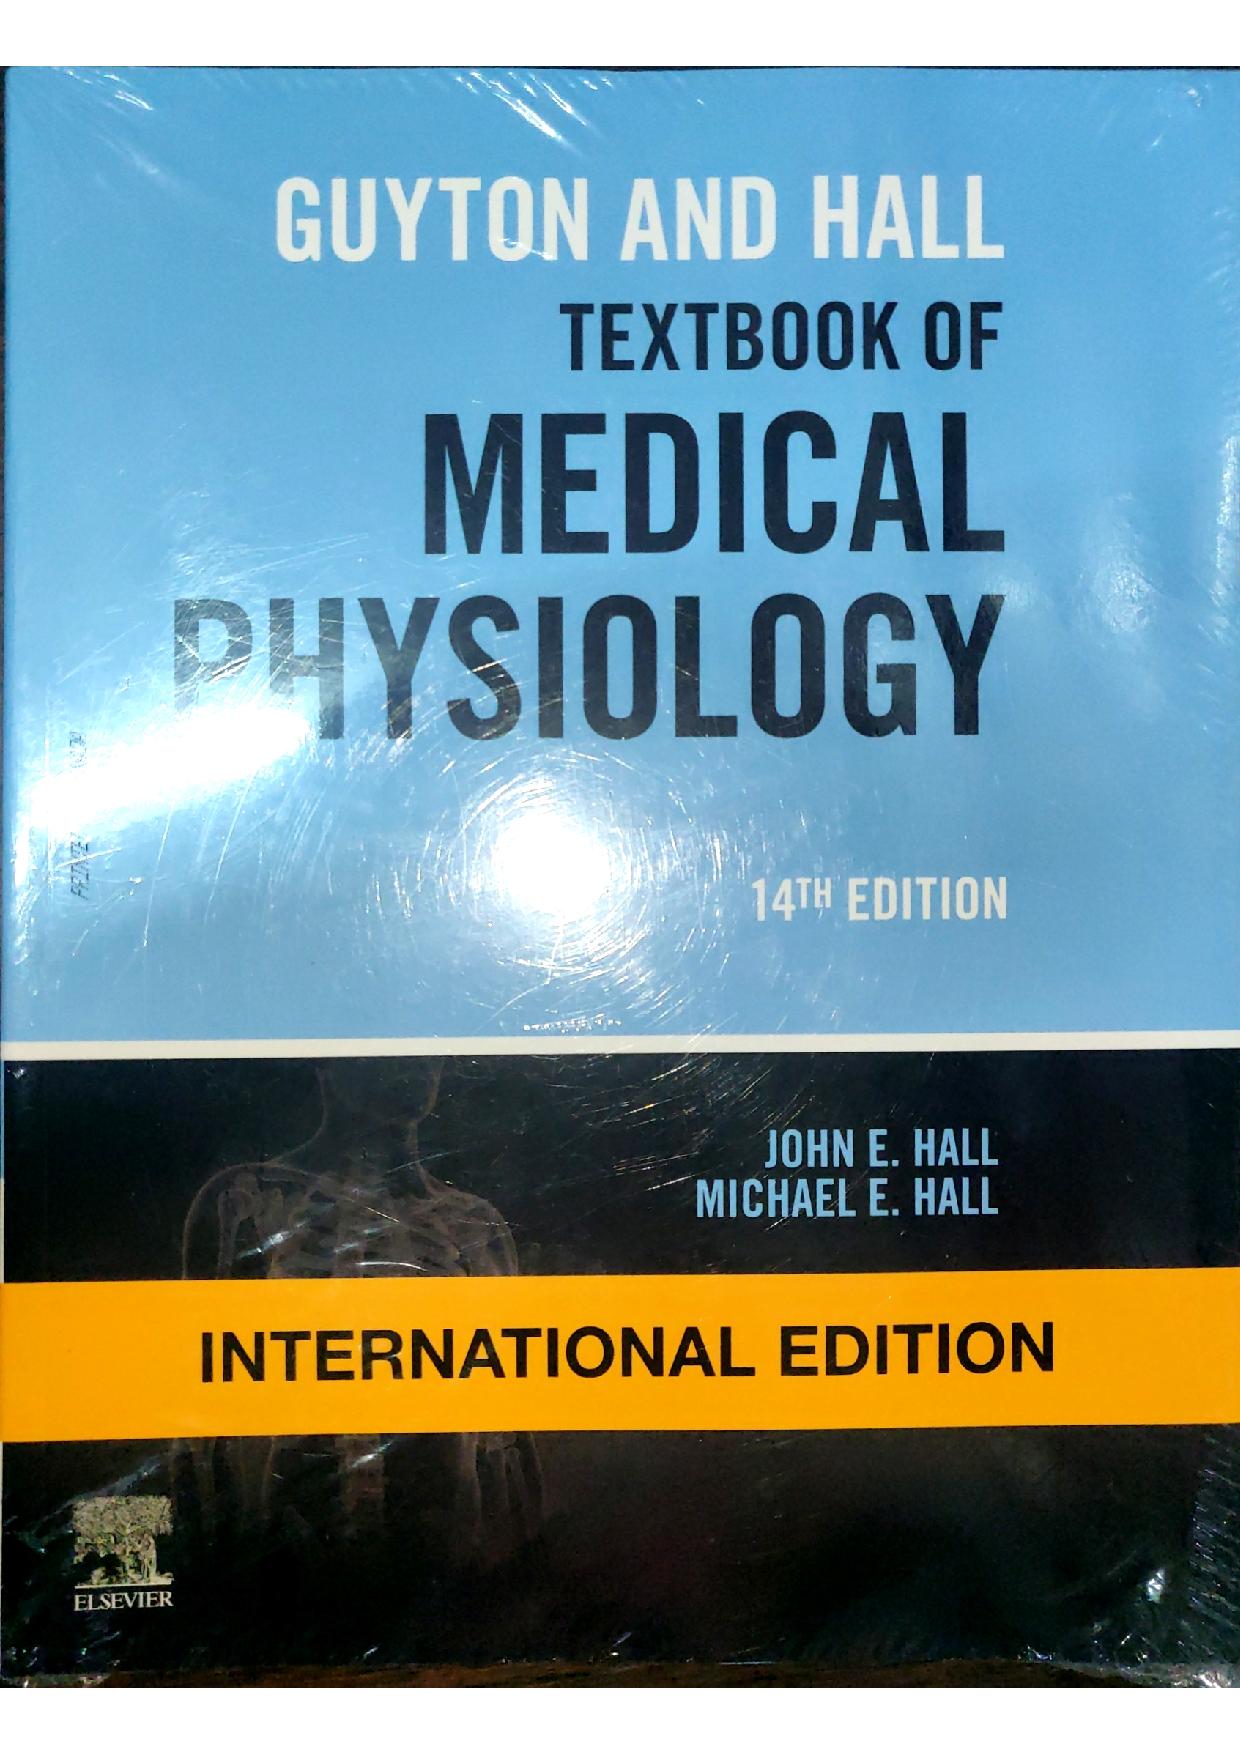 guyton-and-hall-textbook-of-medical-physiology-international-edition